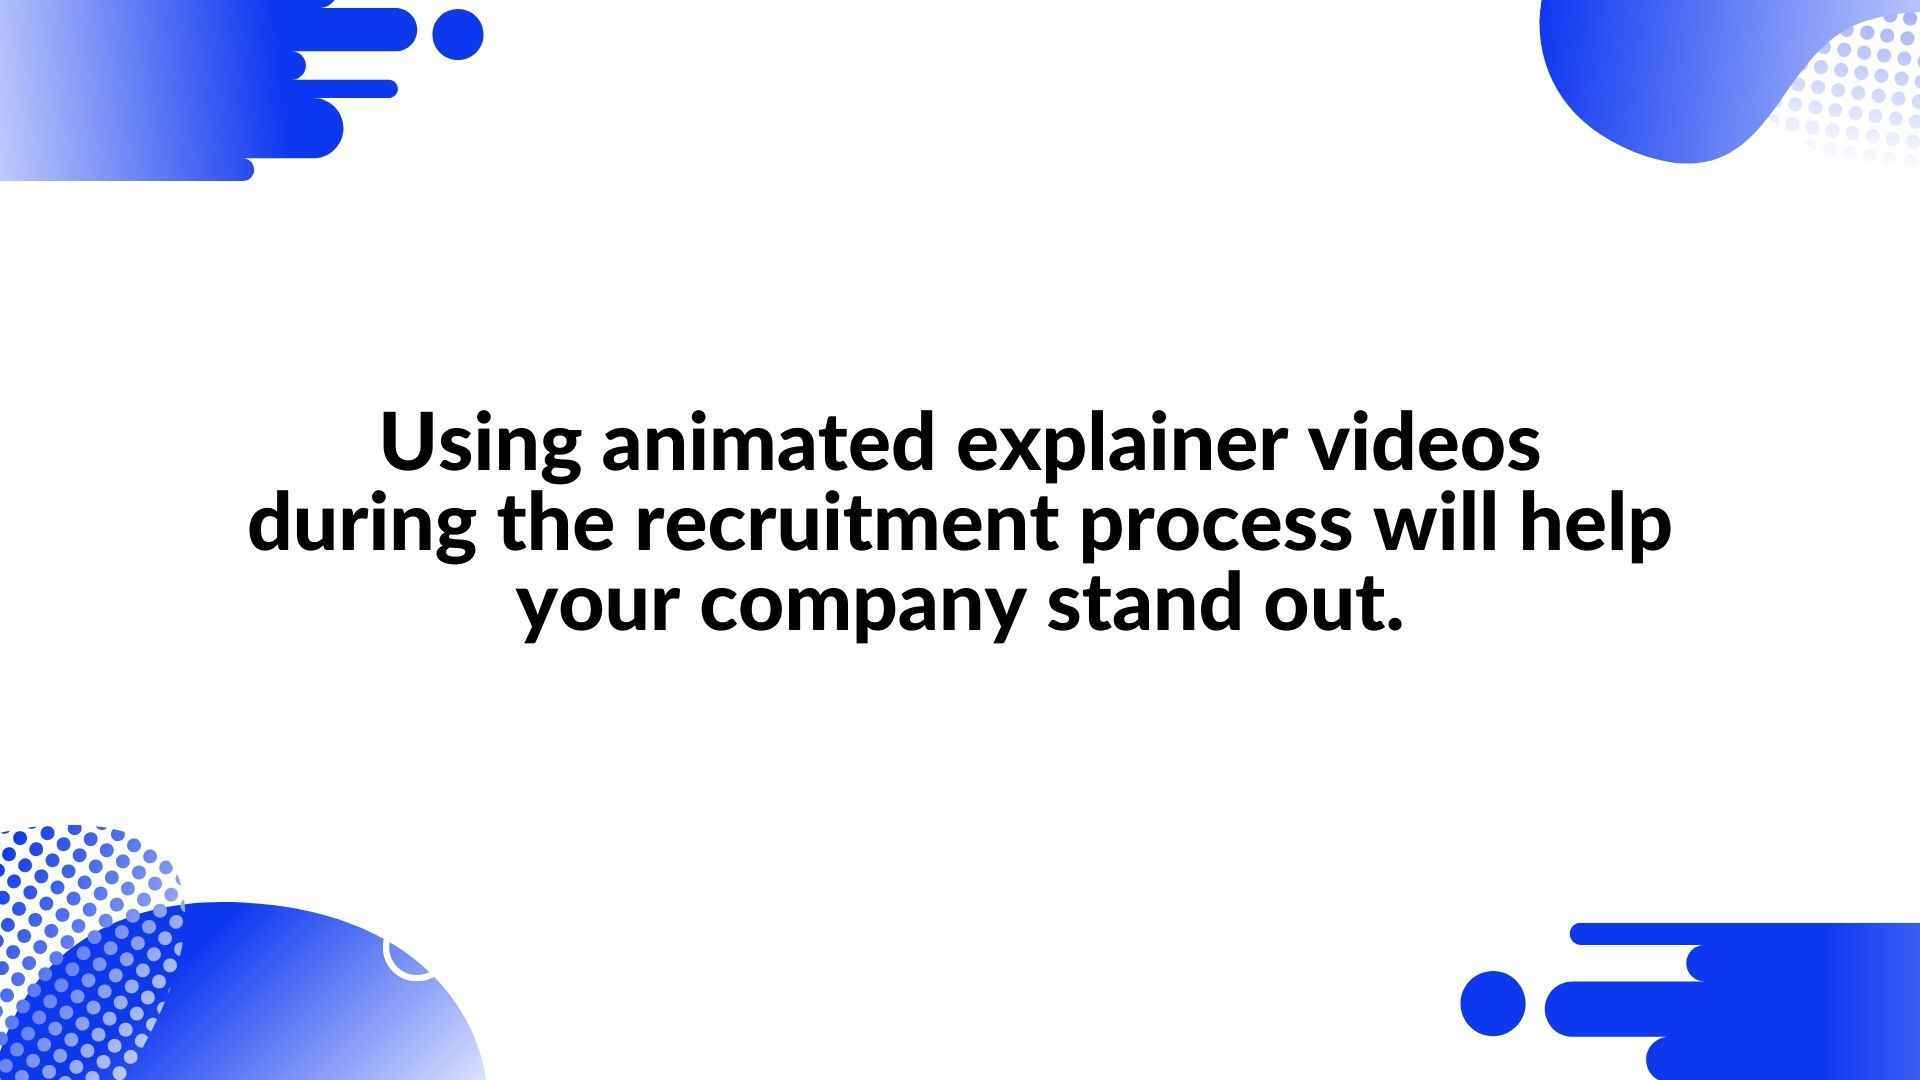 Using animated explainer videos during the recruitment process